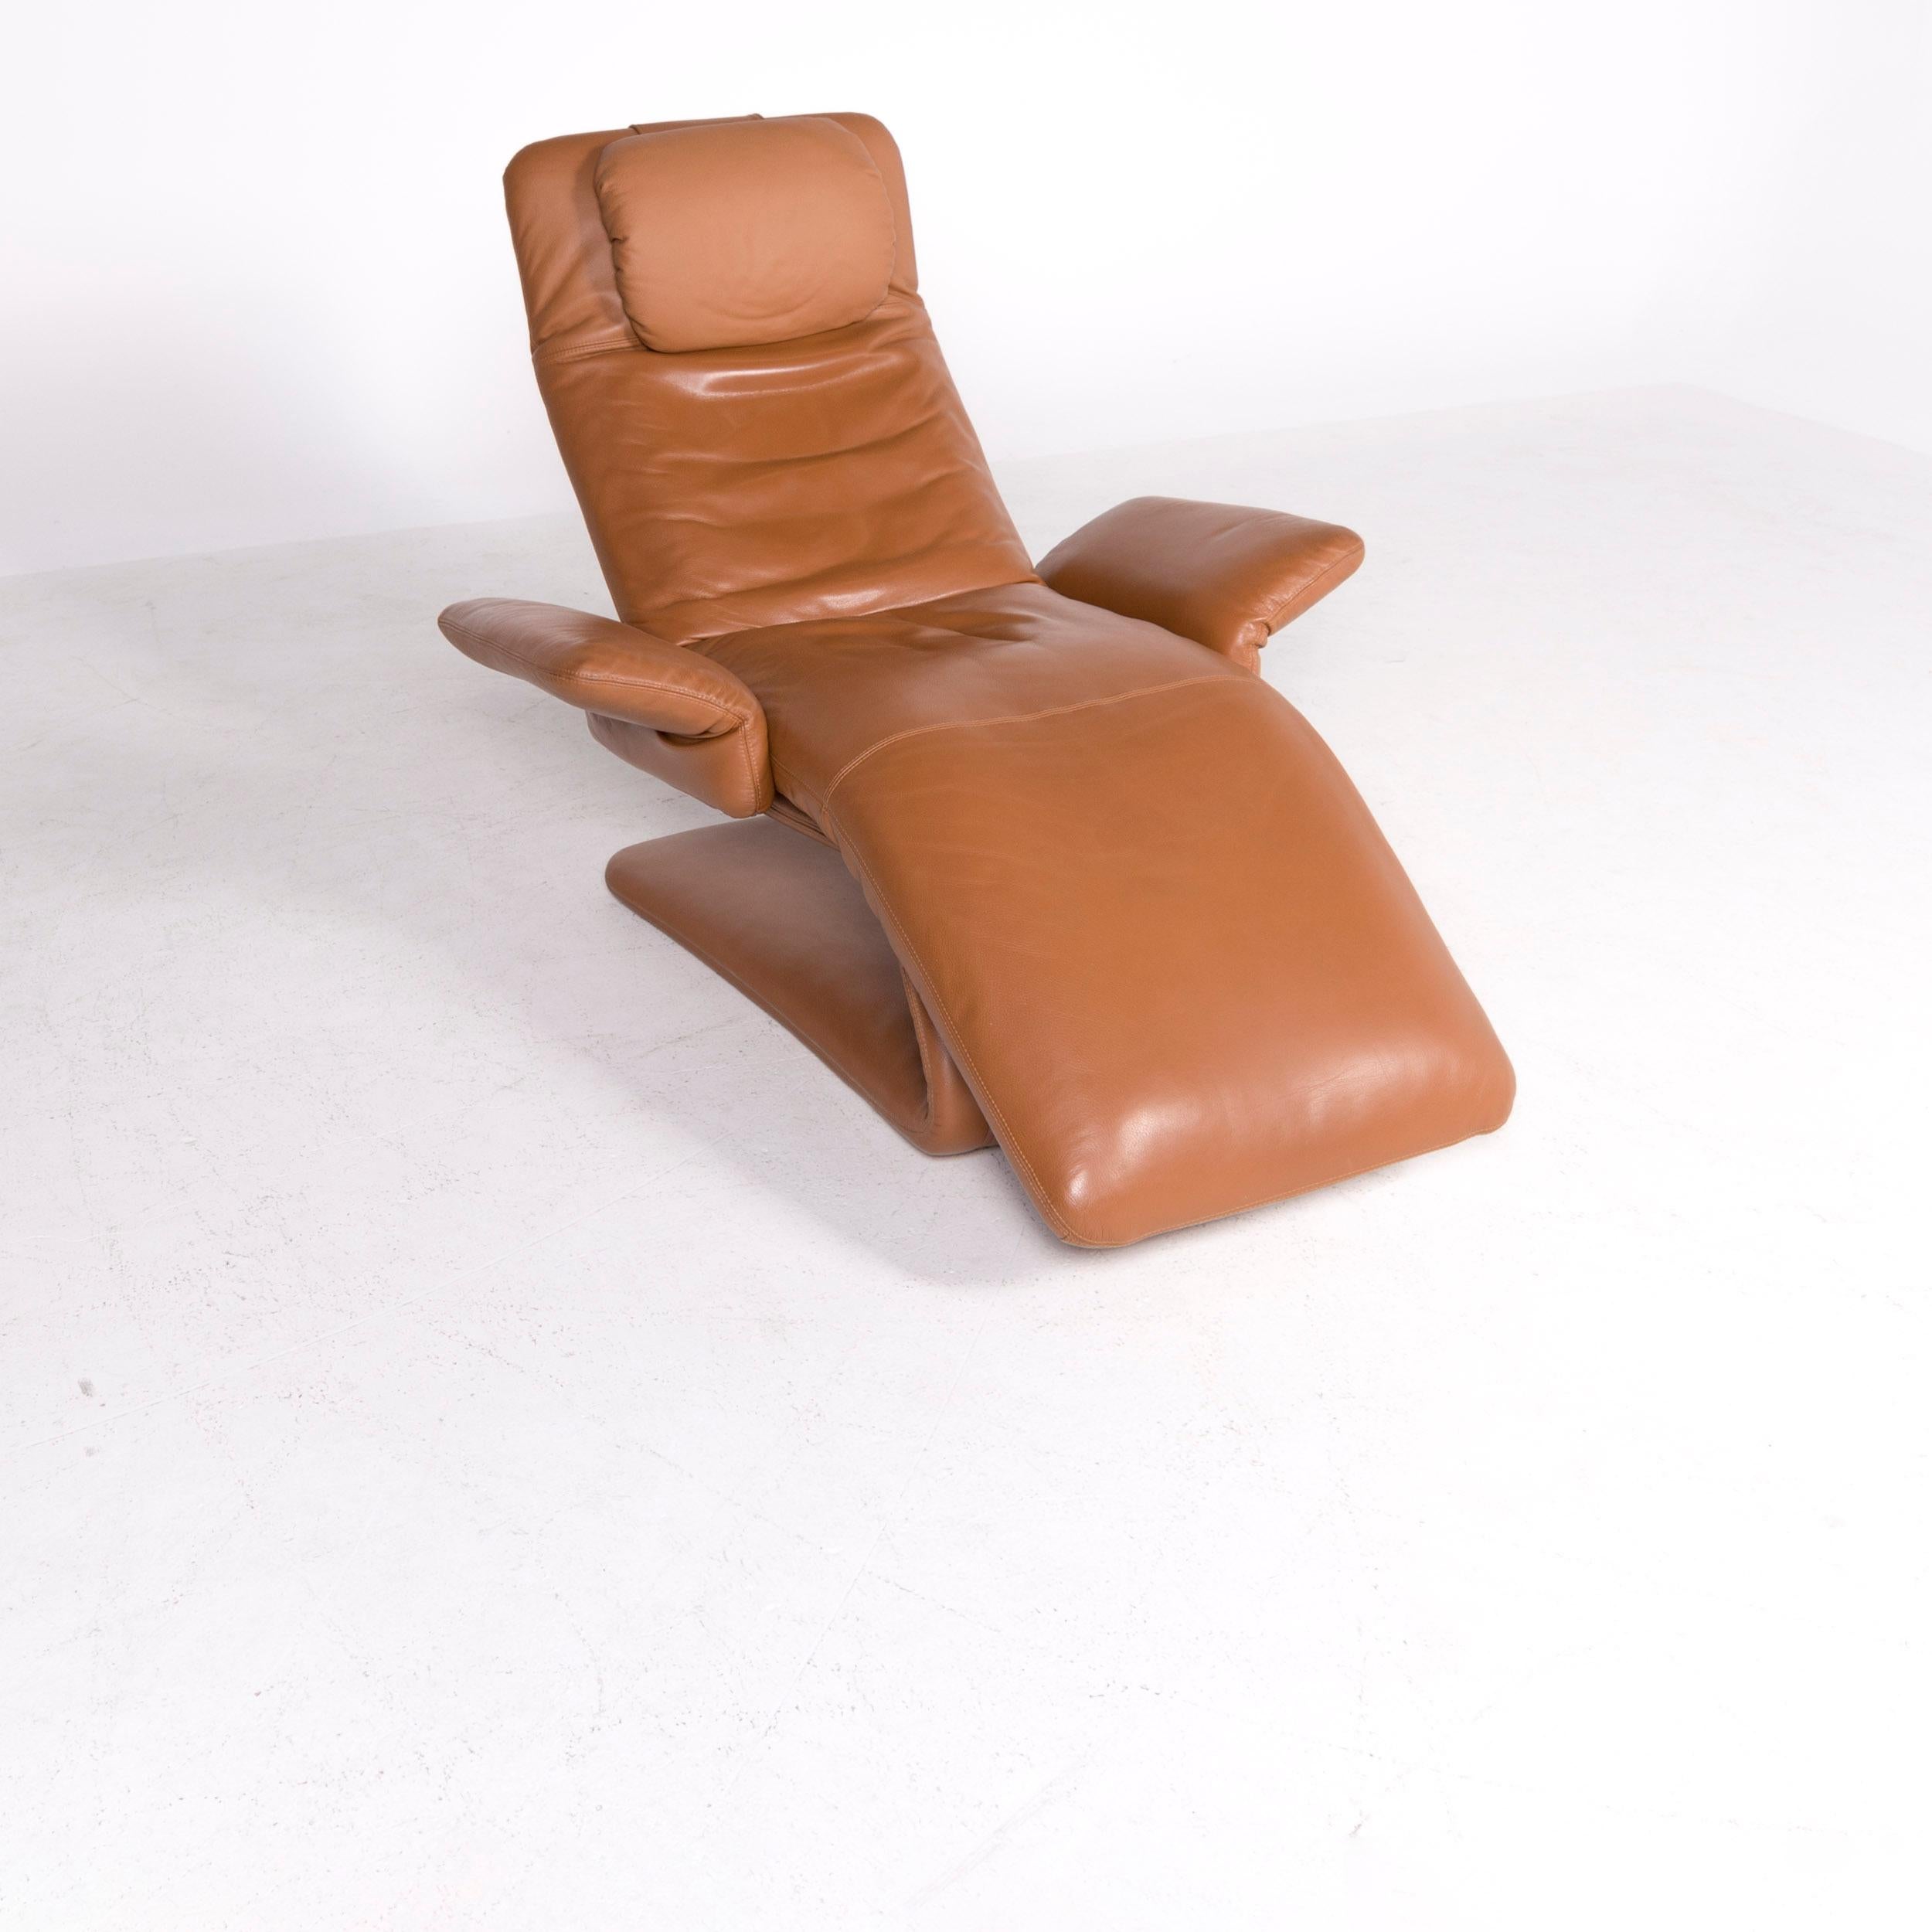 We bring to you a Koinor Imperio designer leather armchair cognac genuine leather chair function.
 

Product measures in centimeters:

Depth: 112
Width: 168
Height: 100
Seat-height: 47
Rest-height: 51
Seat-depth: 117
Seat-width: